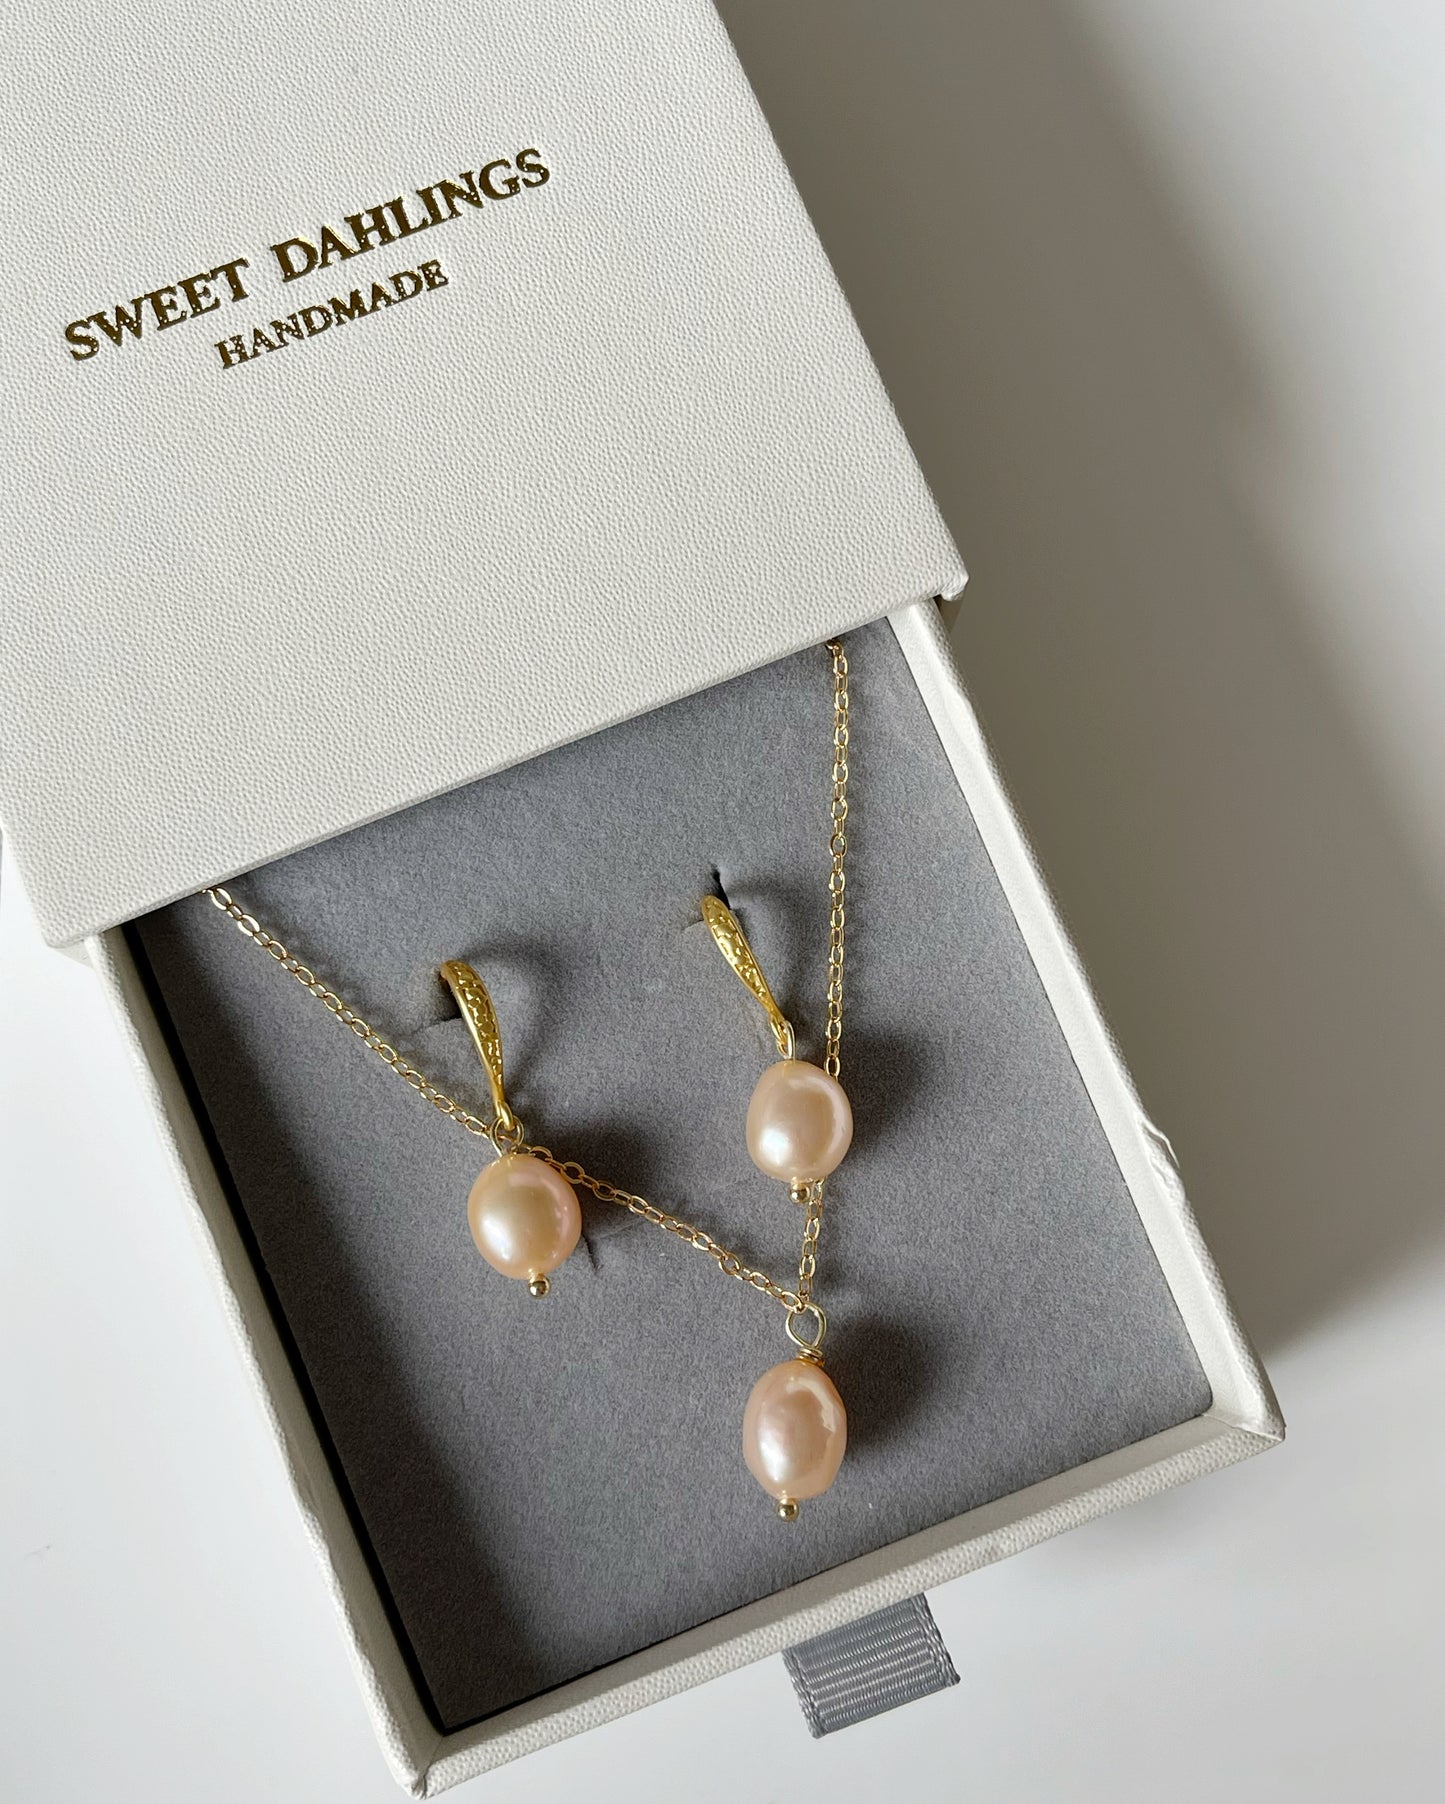 My first baroque pearl necklace and earring set in peachy pink